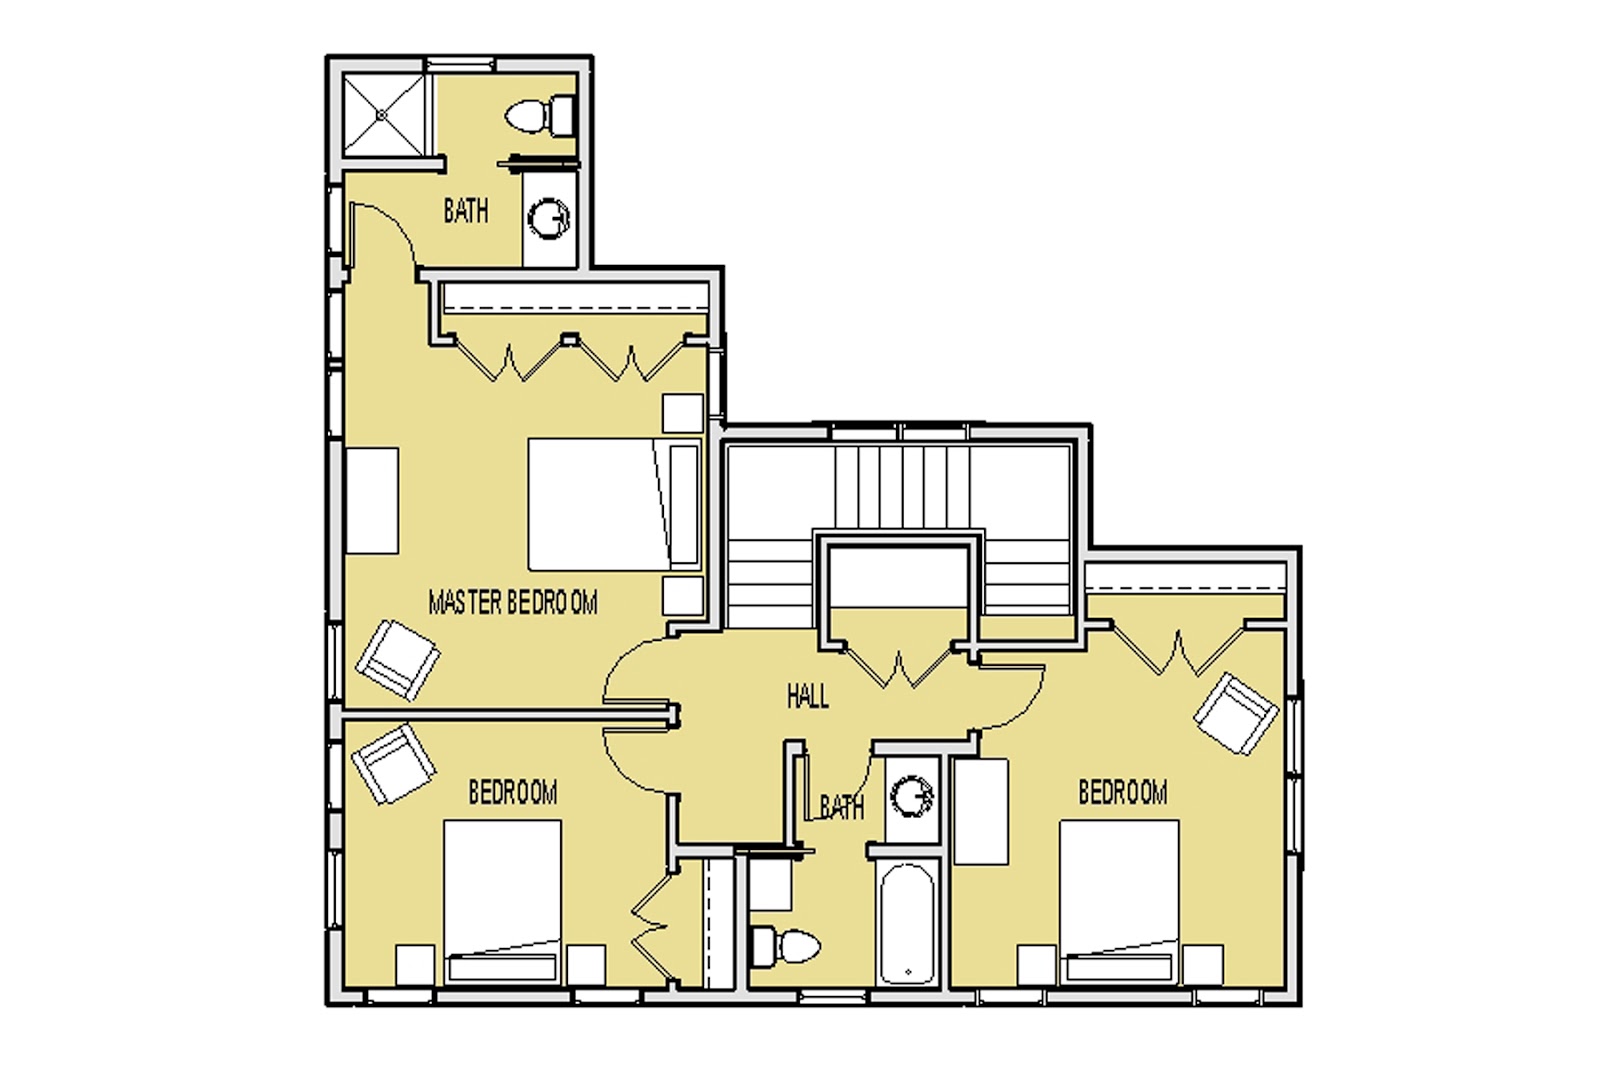 Upper Level Floor Plan - Three bedrooms with two baths.